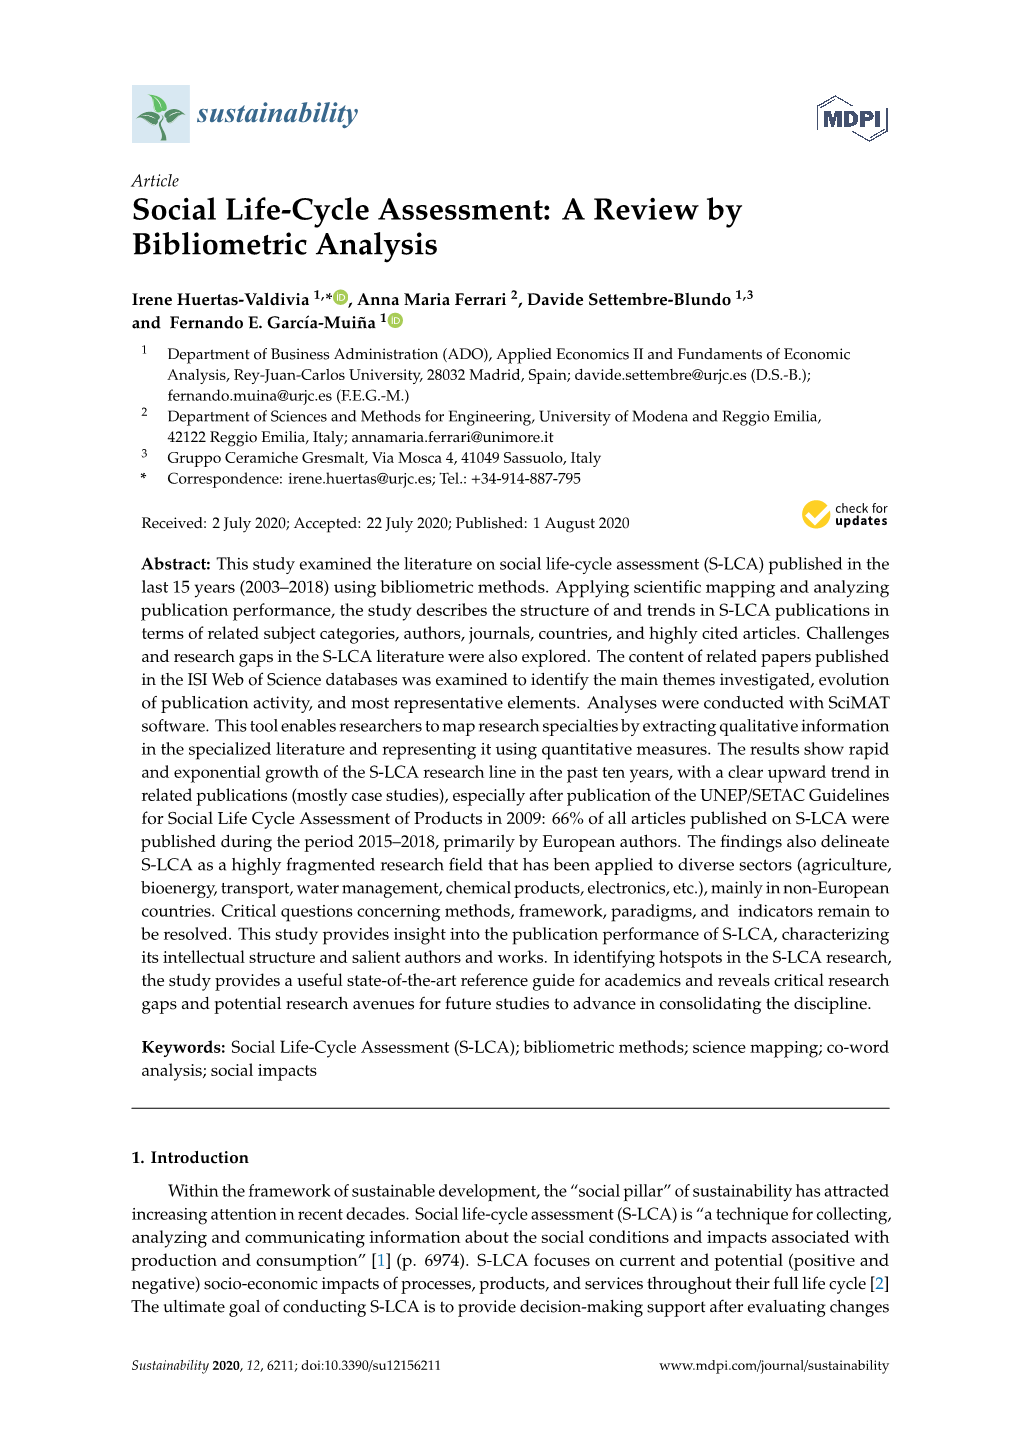 Social Life-Cycle Assessment: a Review by Bibliometric Analysis